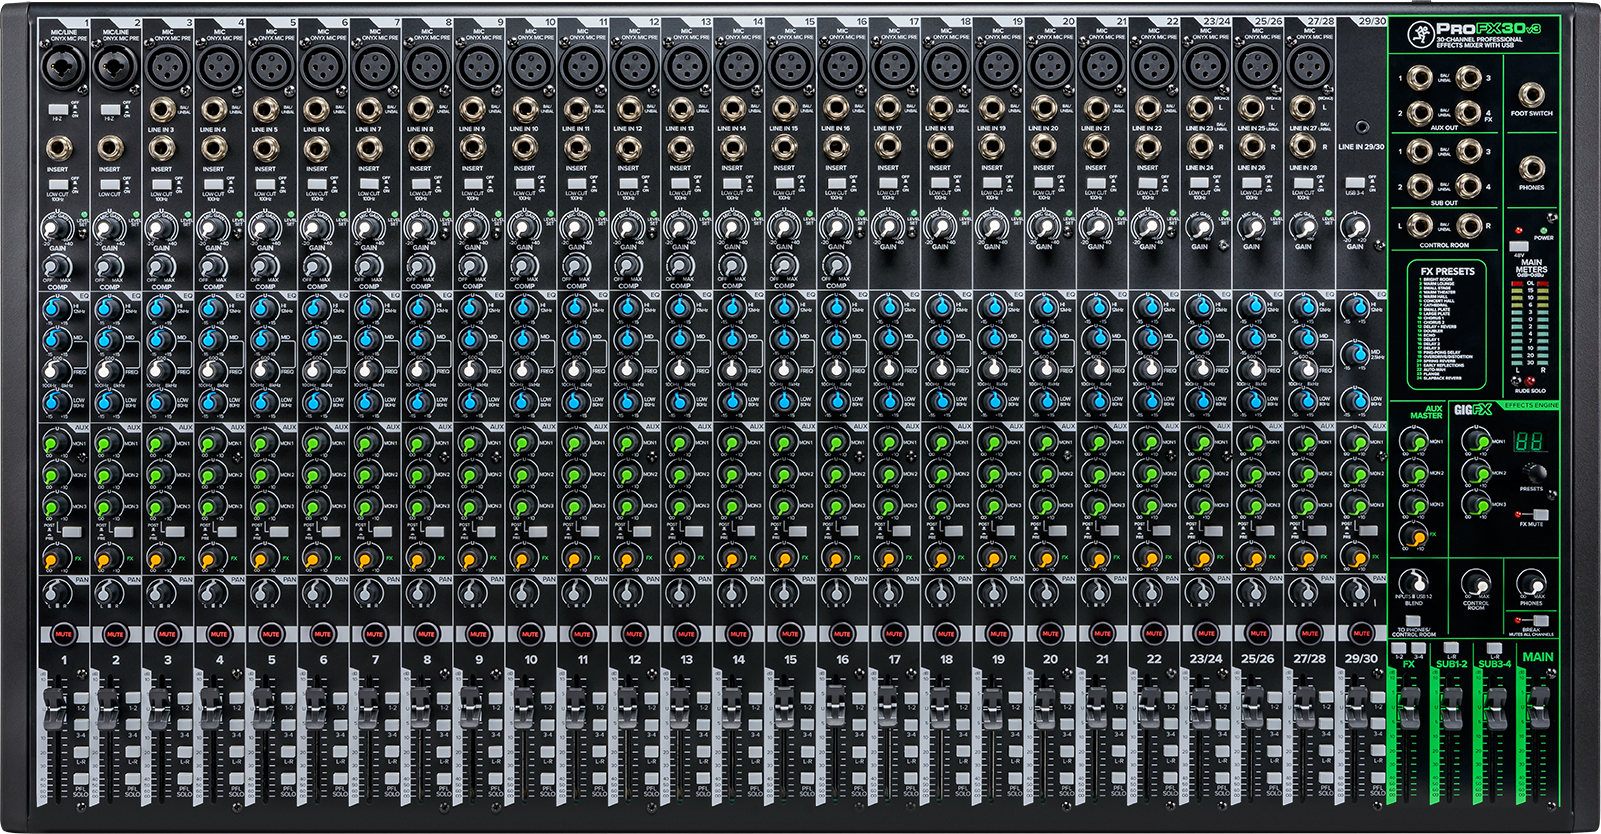 Mackie ProFX30v3 Series 30-Channel Professional Effects Mixer with USB Onyx Mic Preamps and GigFX effects engine Unpowered - image 1 of 1